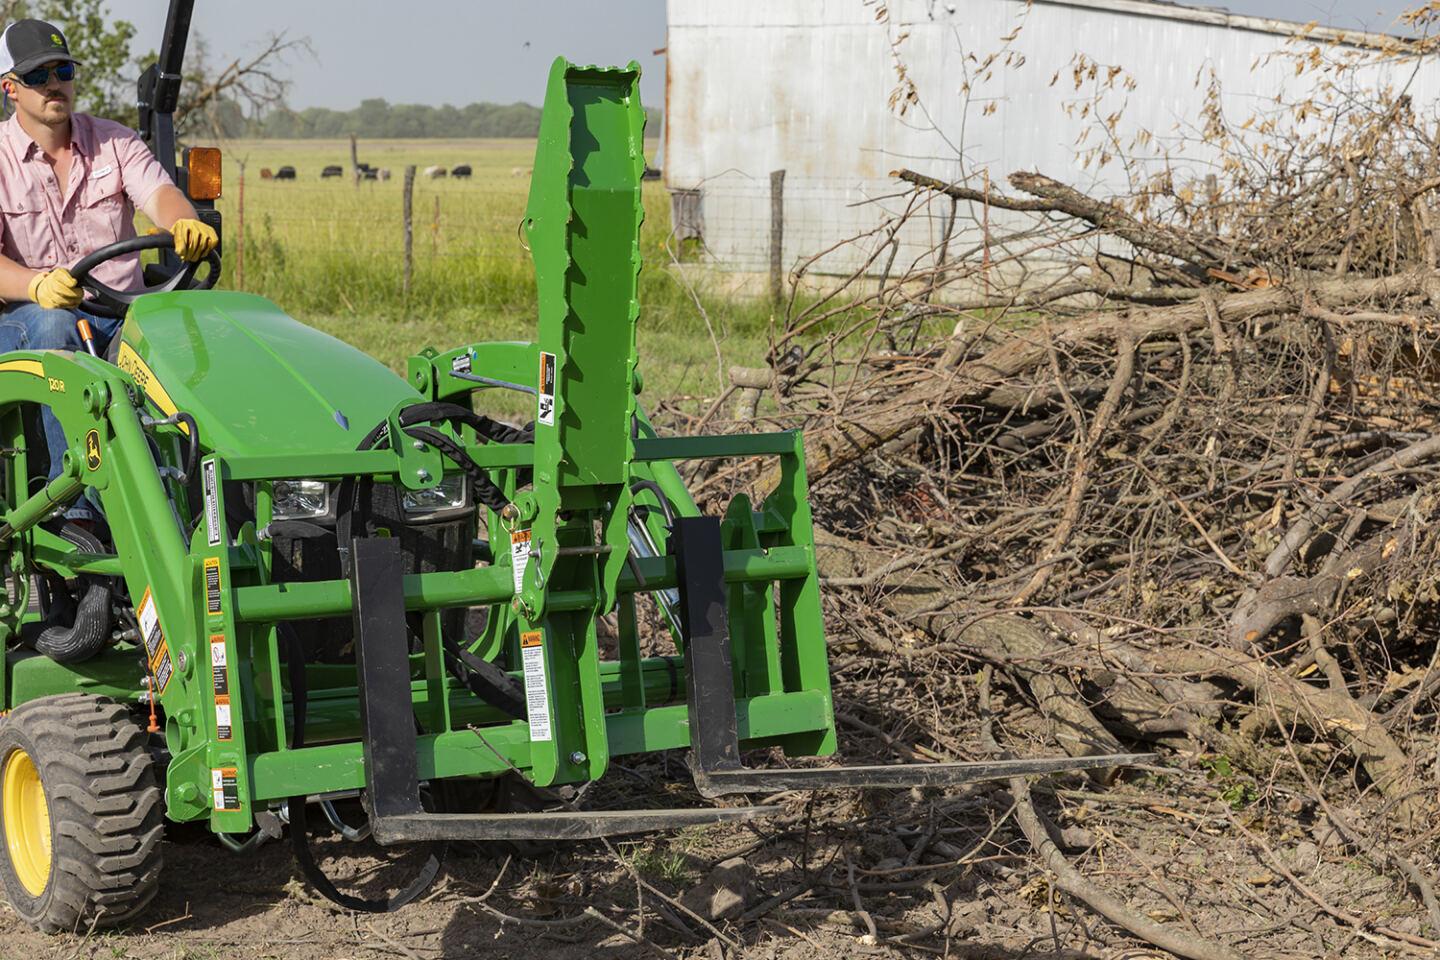 John Deere Updates Its Lineup With The New Pallet Fork North America Farm Equipment